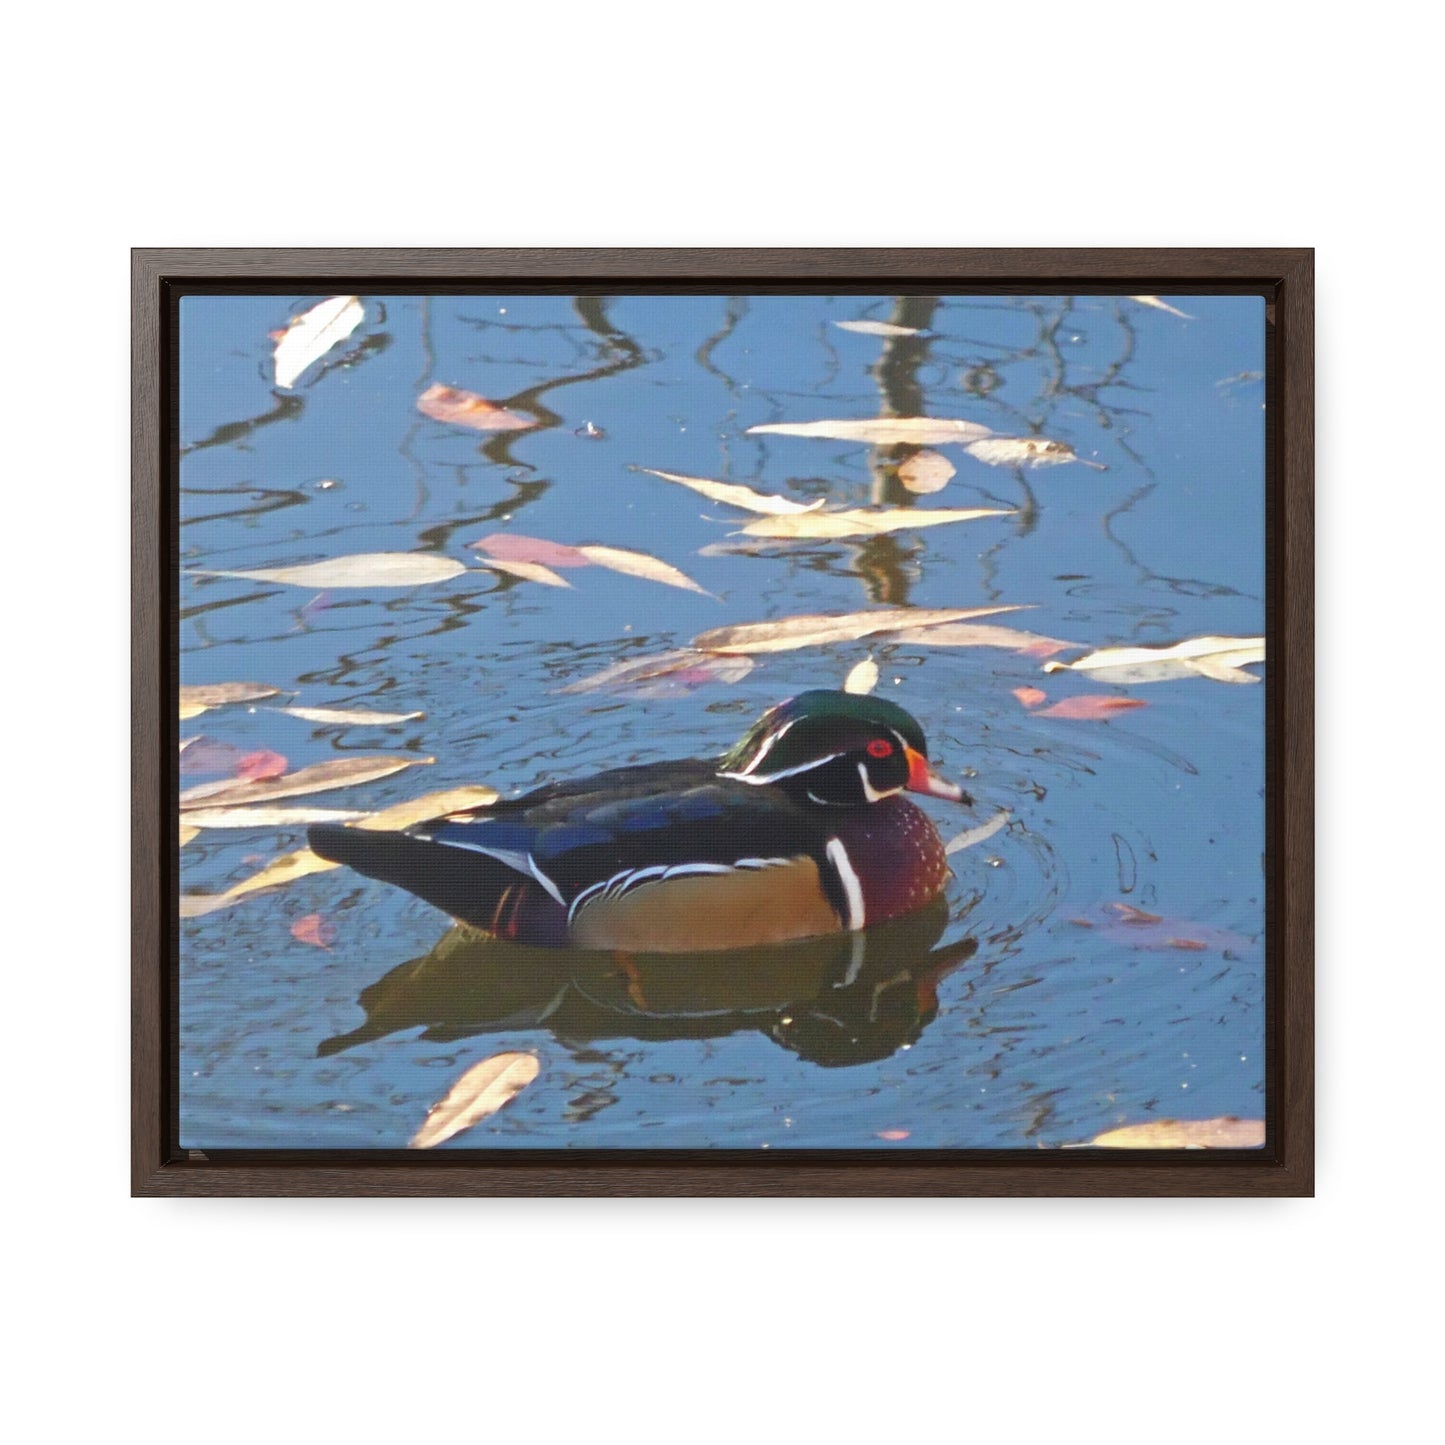 Autumn Wood Duck Gallery Canvas Wraps Framed